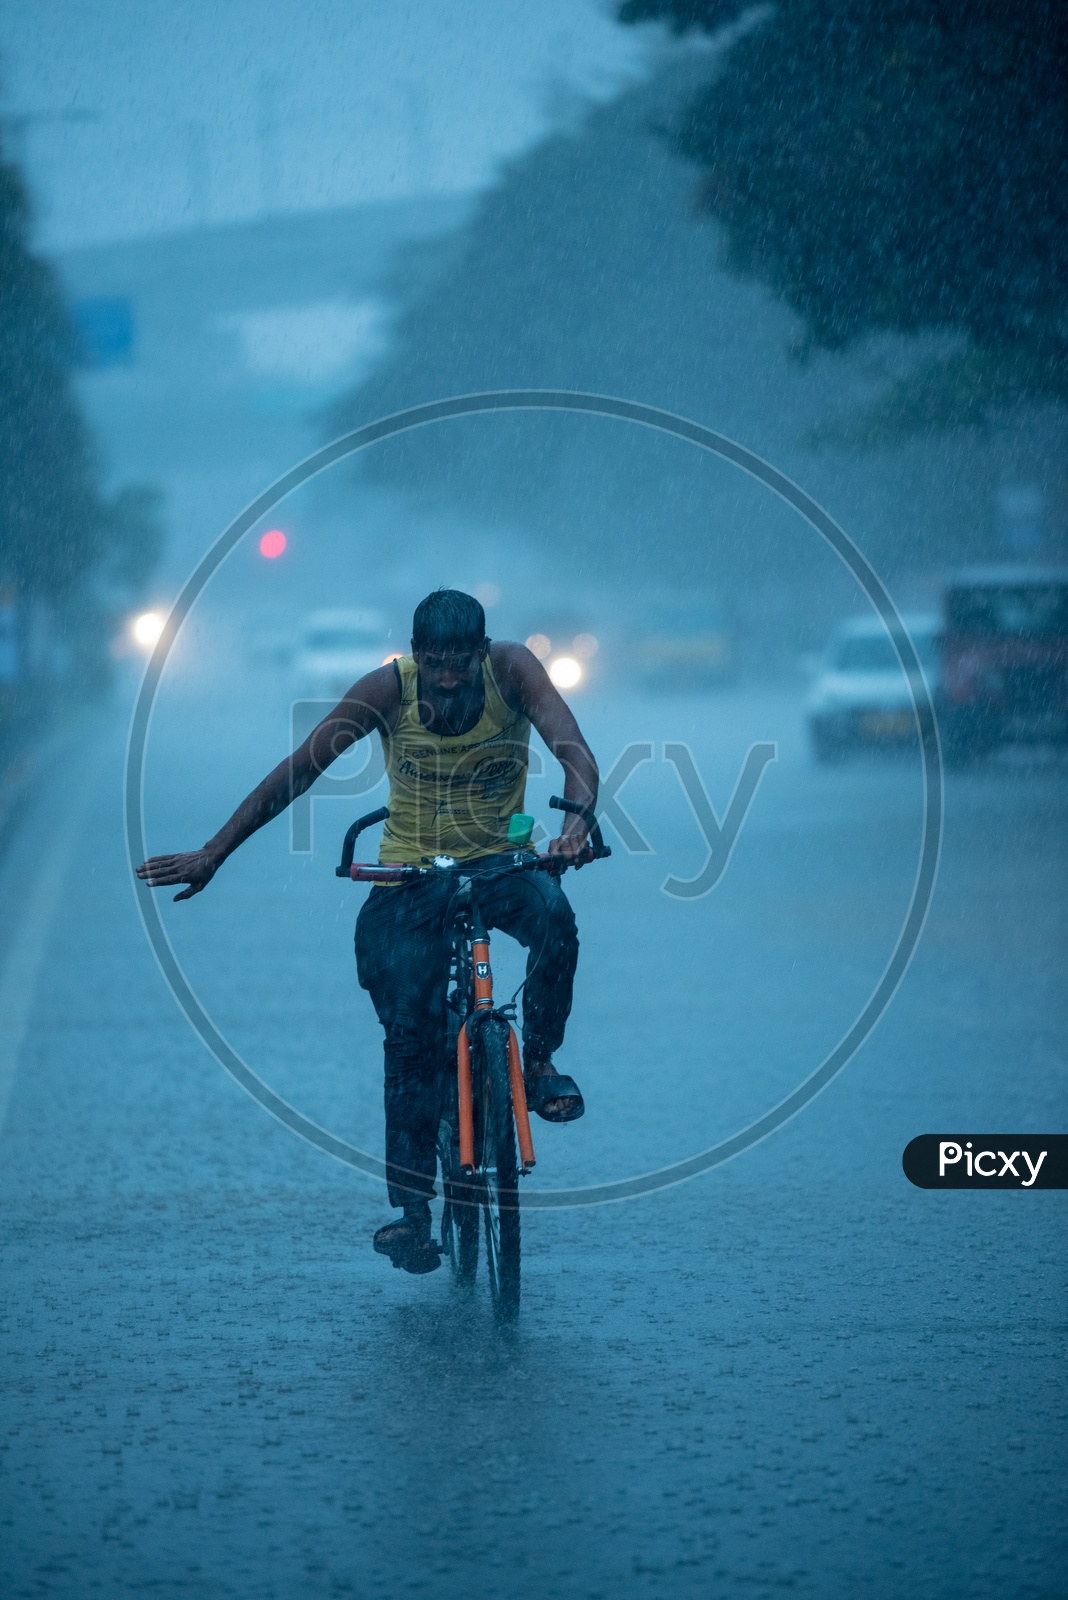 A Bicycle Rider Commuting In Heavy Rain